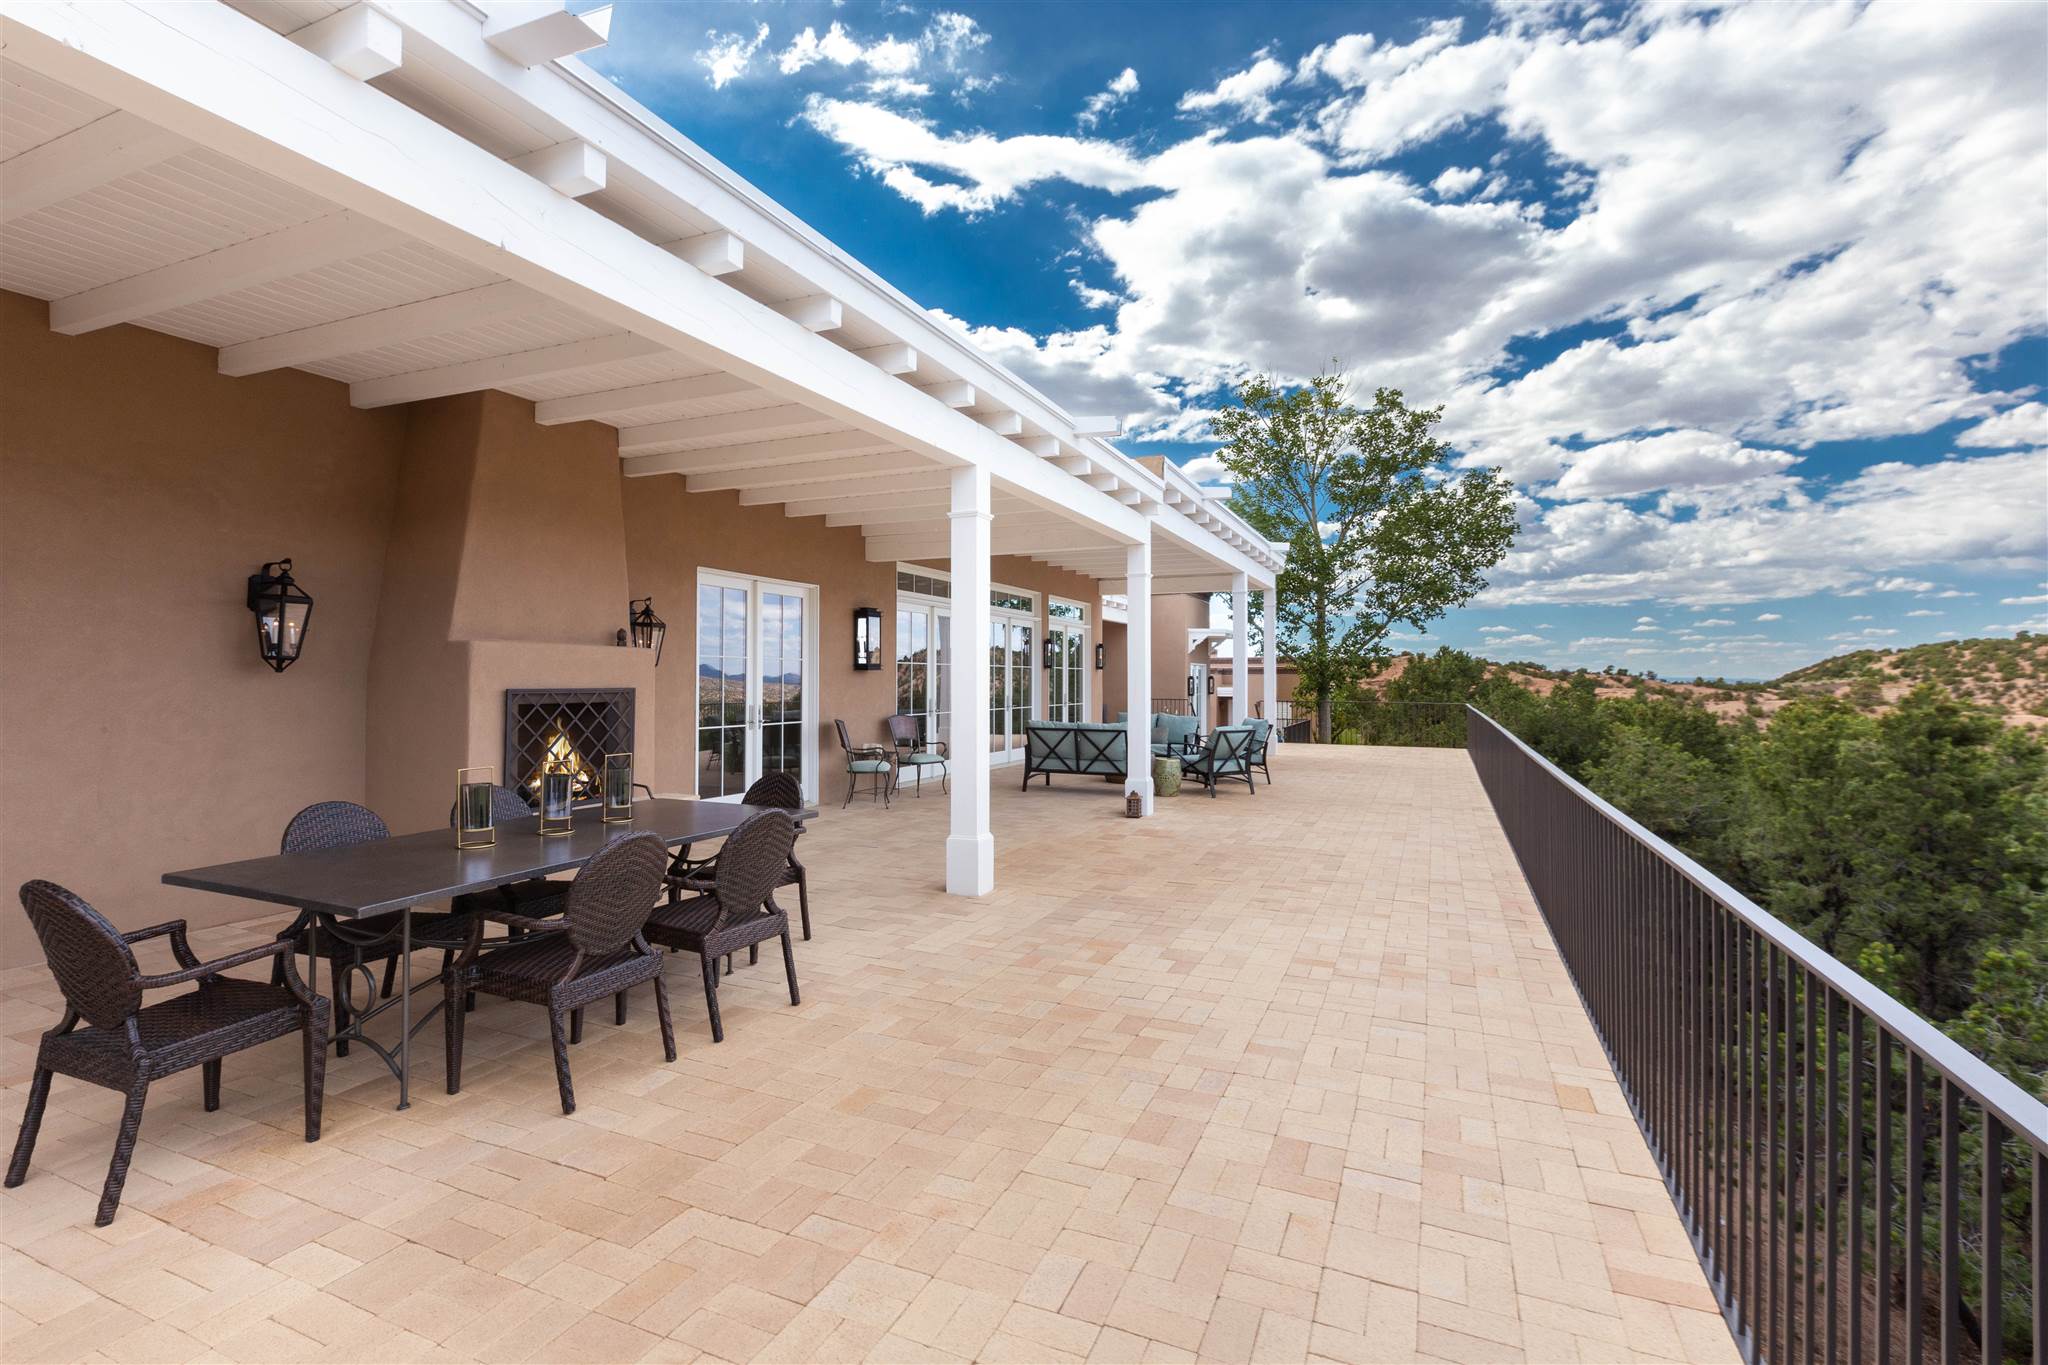 38 Circle Drive Compound, Santa Fe, New Mexico 87501, 4 Bedrooms Bedrooms, ,5 BathroomsBathrooms,Residential,For Sale,38 Circle Drive Compound,202002724